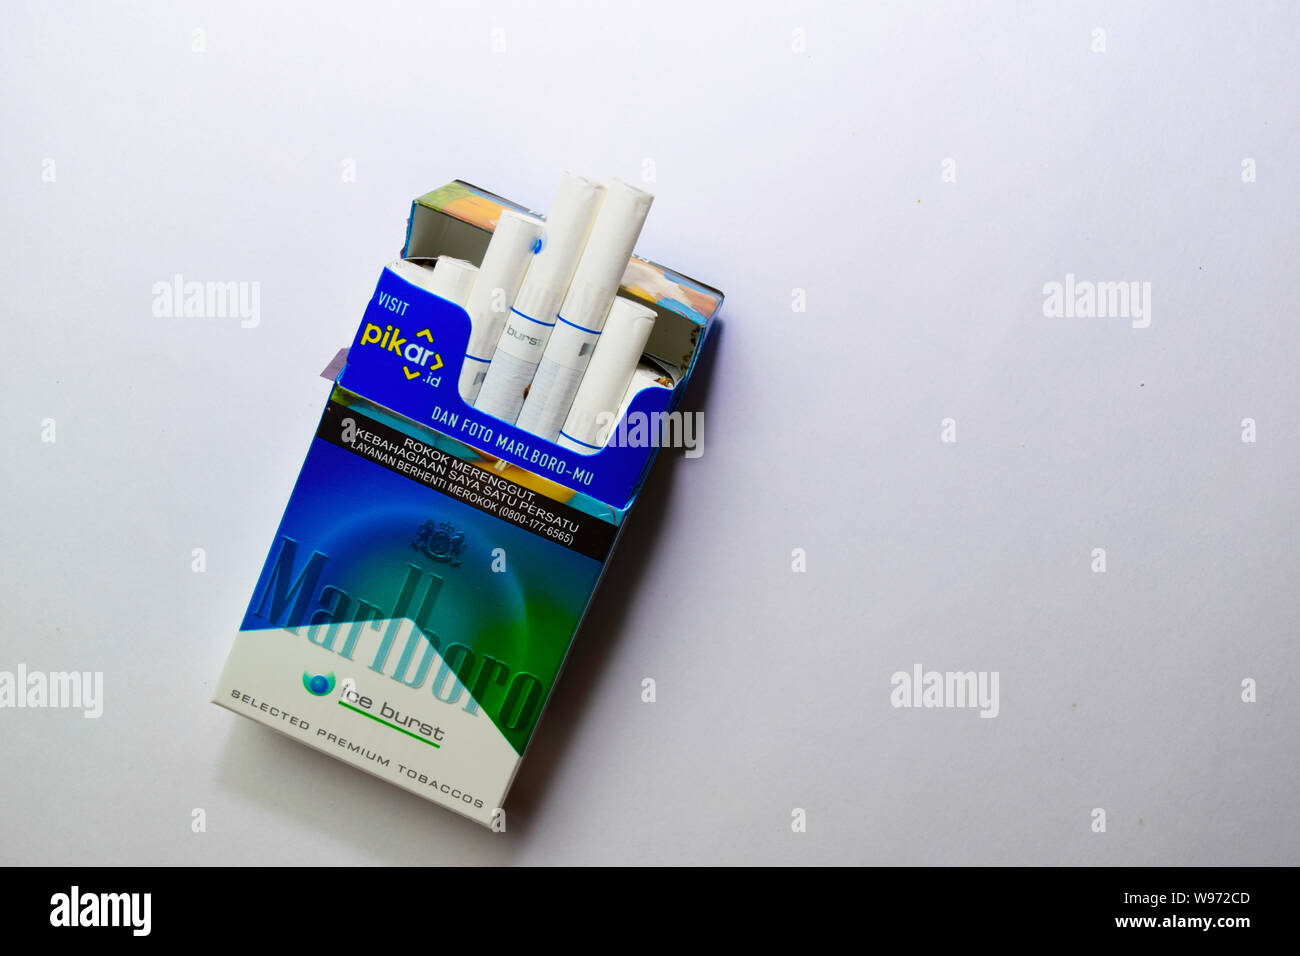 Bekasi, Indonesia - August 13th 2019: Pack of Marlboro Cigarettes, made by Philip Morris. Marlboro is the largest selling brand of cigarettes in the w Stock Photo